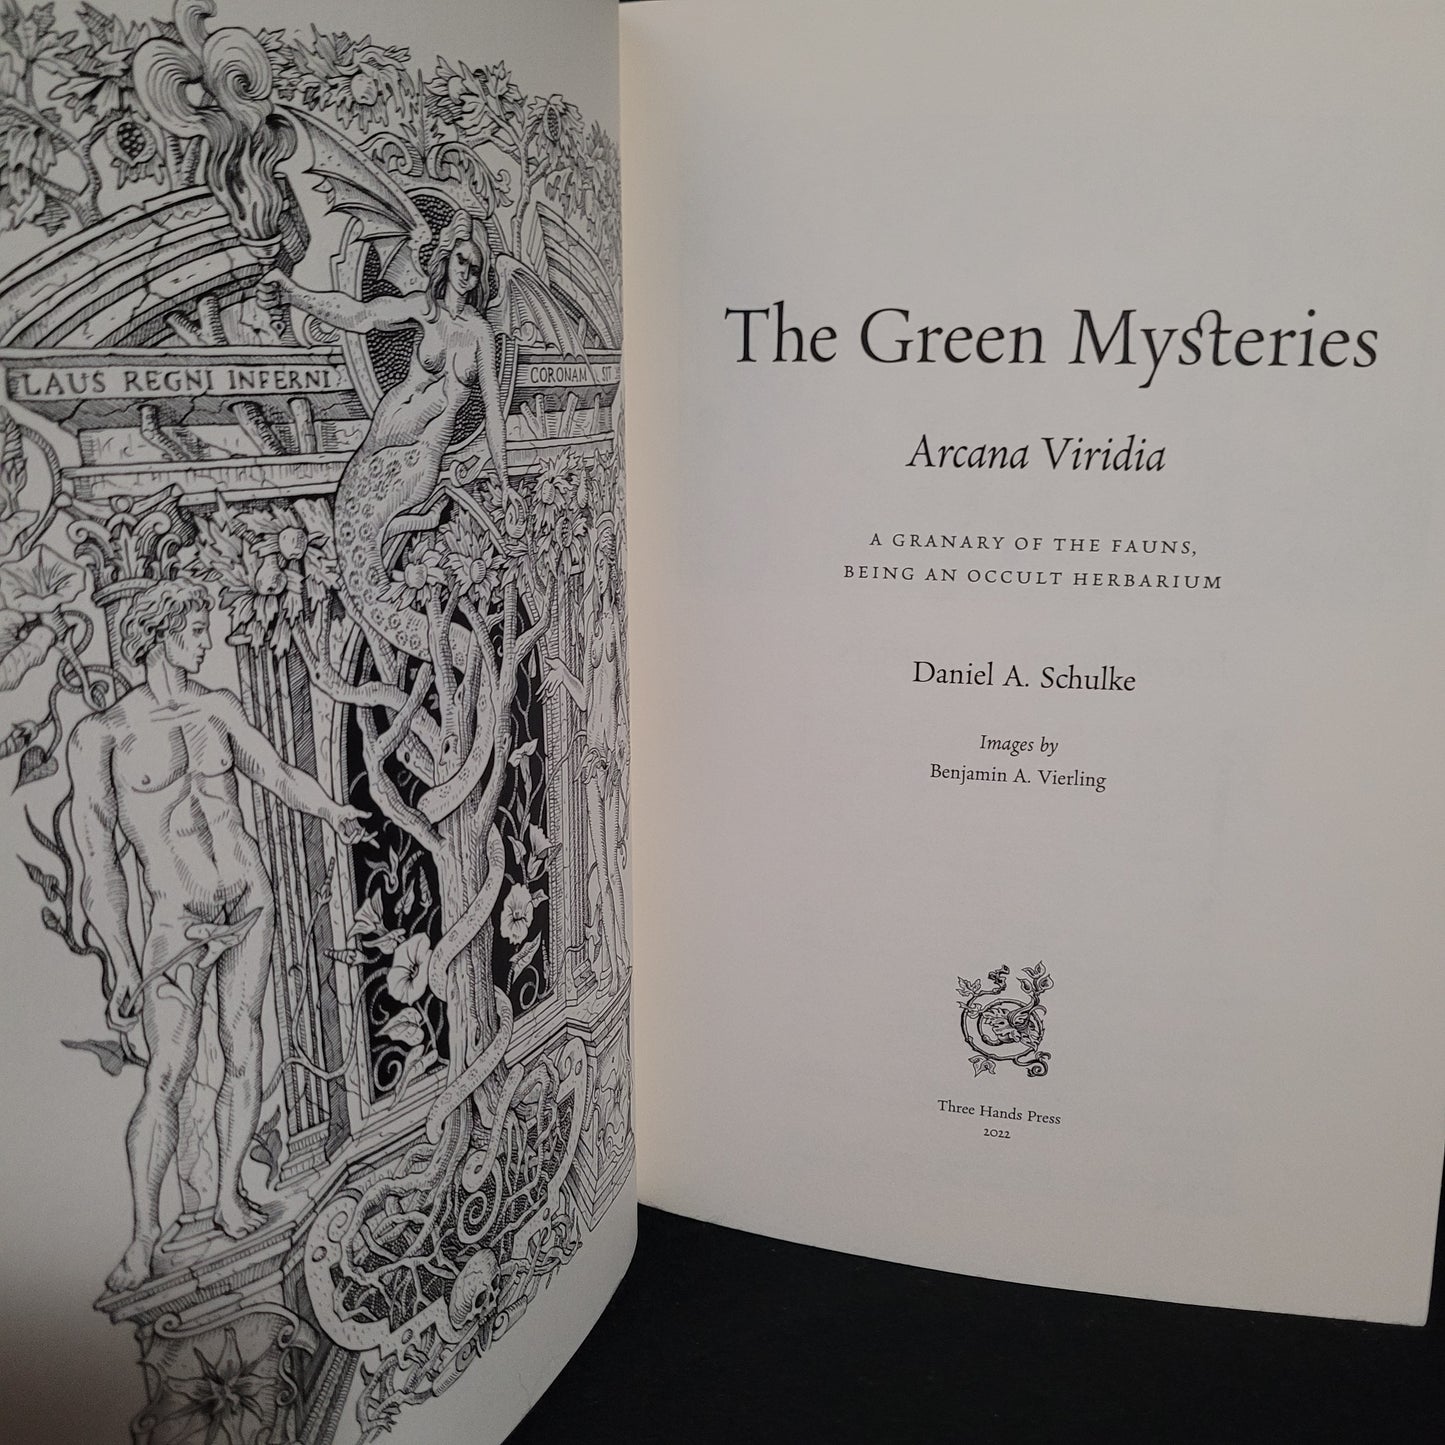 The Green Mysteries: An Occult Herbarium by Daniel A. Schulke with Illustrations by Benjamin A. Vierling (Three Hands Press, 2022) Paperback Edition